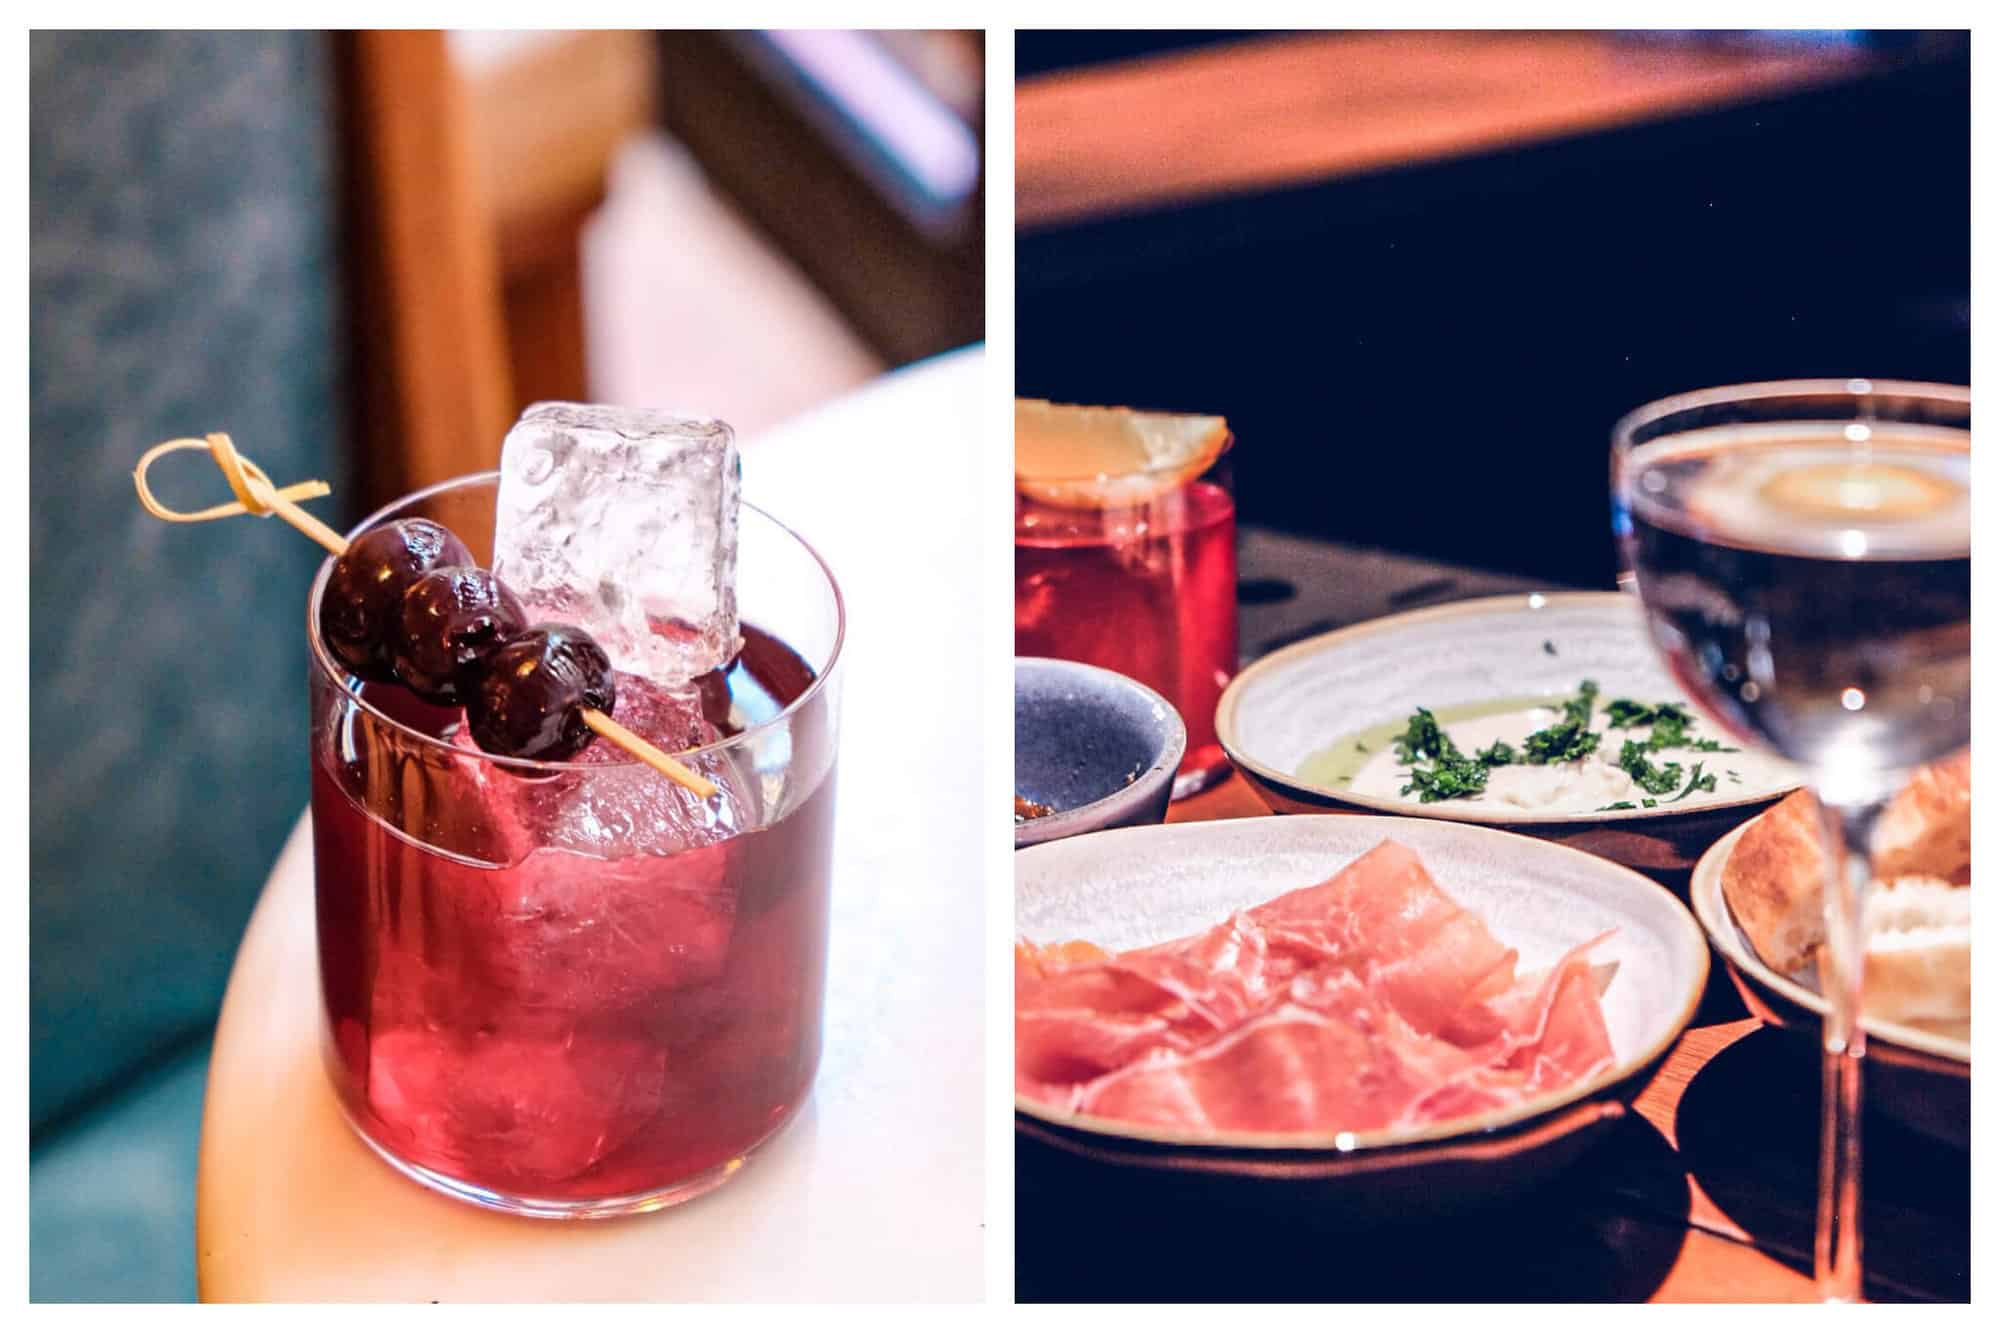 Left: a drink at the bar in Paris called "Little Red Door." The drink is red and there are several ice cubes in it as well as three blueberries on a toothpick resting on top of it. Right: plates of food at "Little Red Door.3 There is a meat dish, a bowl of tzatziki, a cut up baguette, and two drinks.  